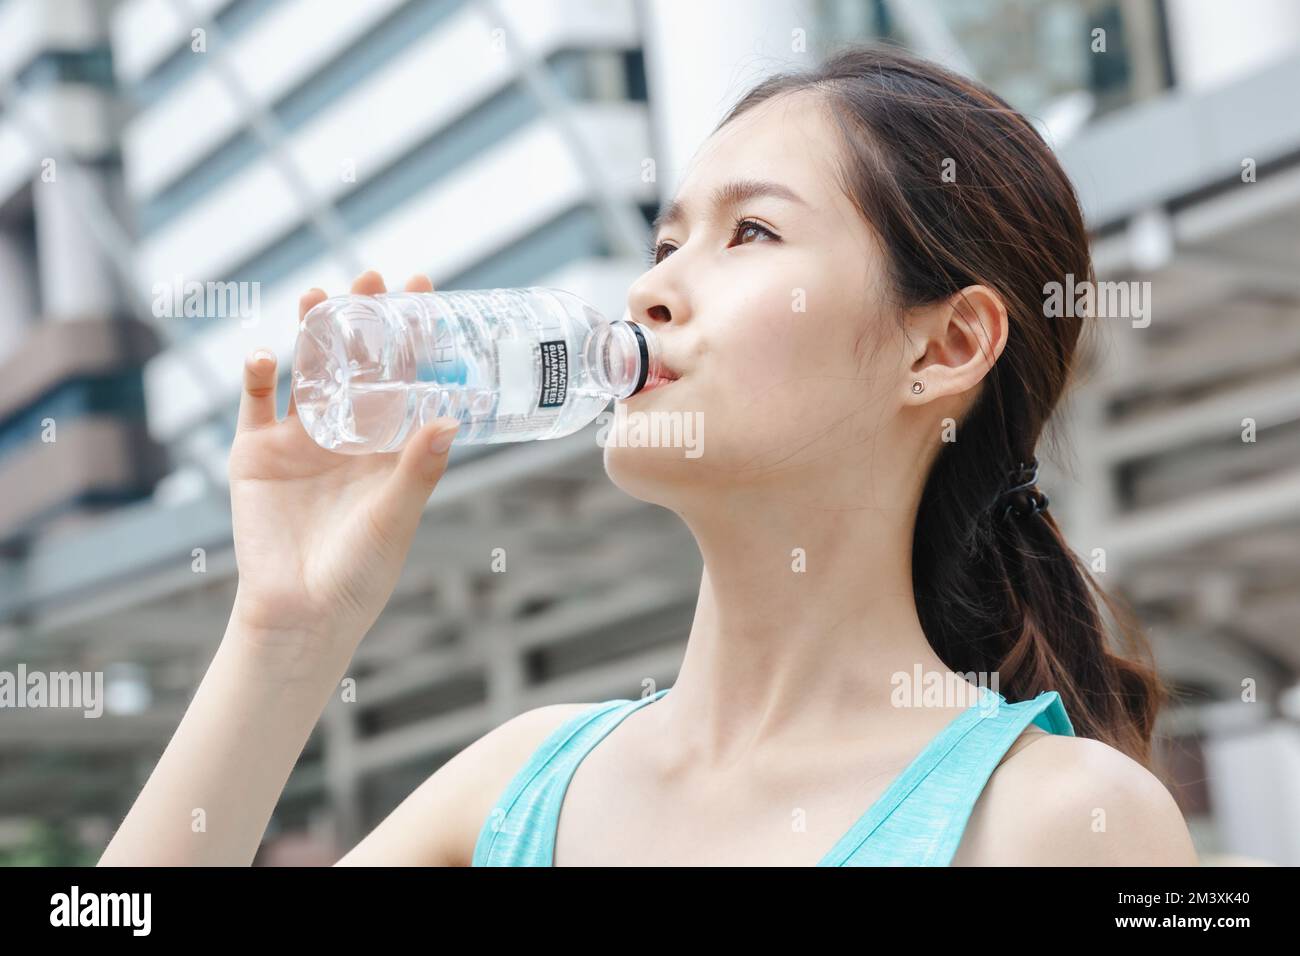 https://c8.alamy.com/comp/2M3XK40/asian-lady-drinking-water-sport-healthy-lifestyle-outdoors-in-building-city-background-2M3XK40.jpg